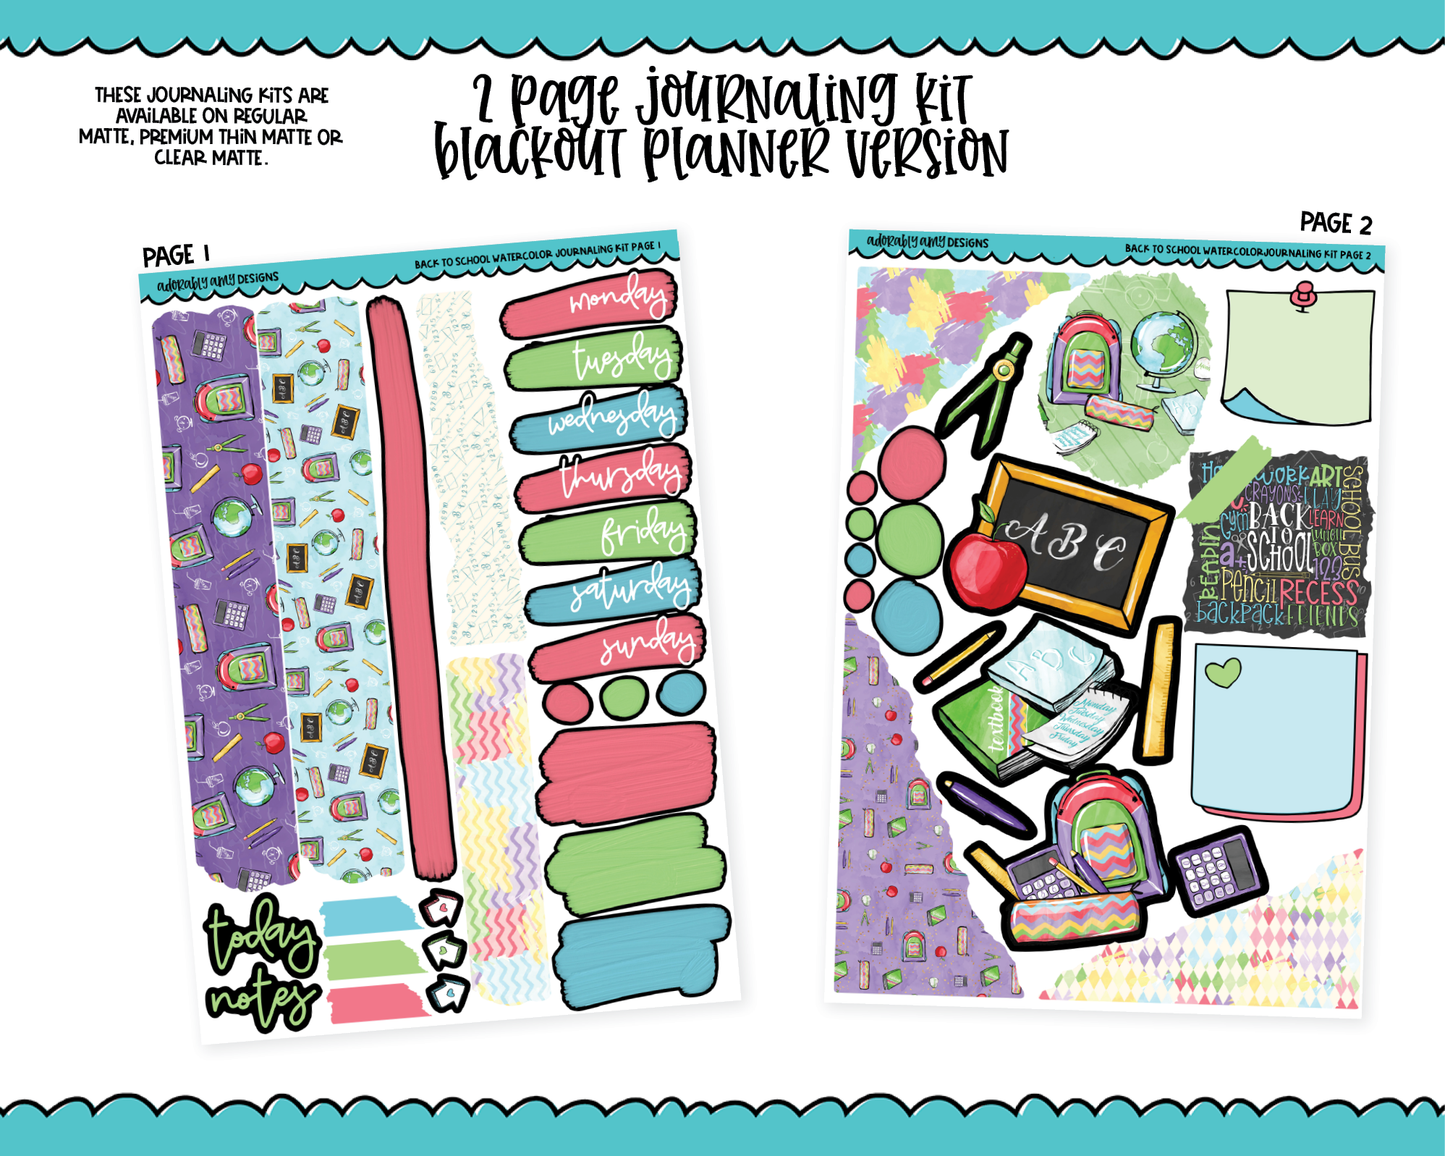 Journaling Kit Back to School Watercolor Planner Sticker Kit in White OR Black for Blackout Planners